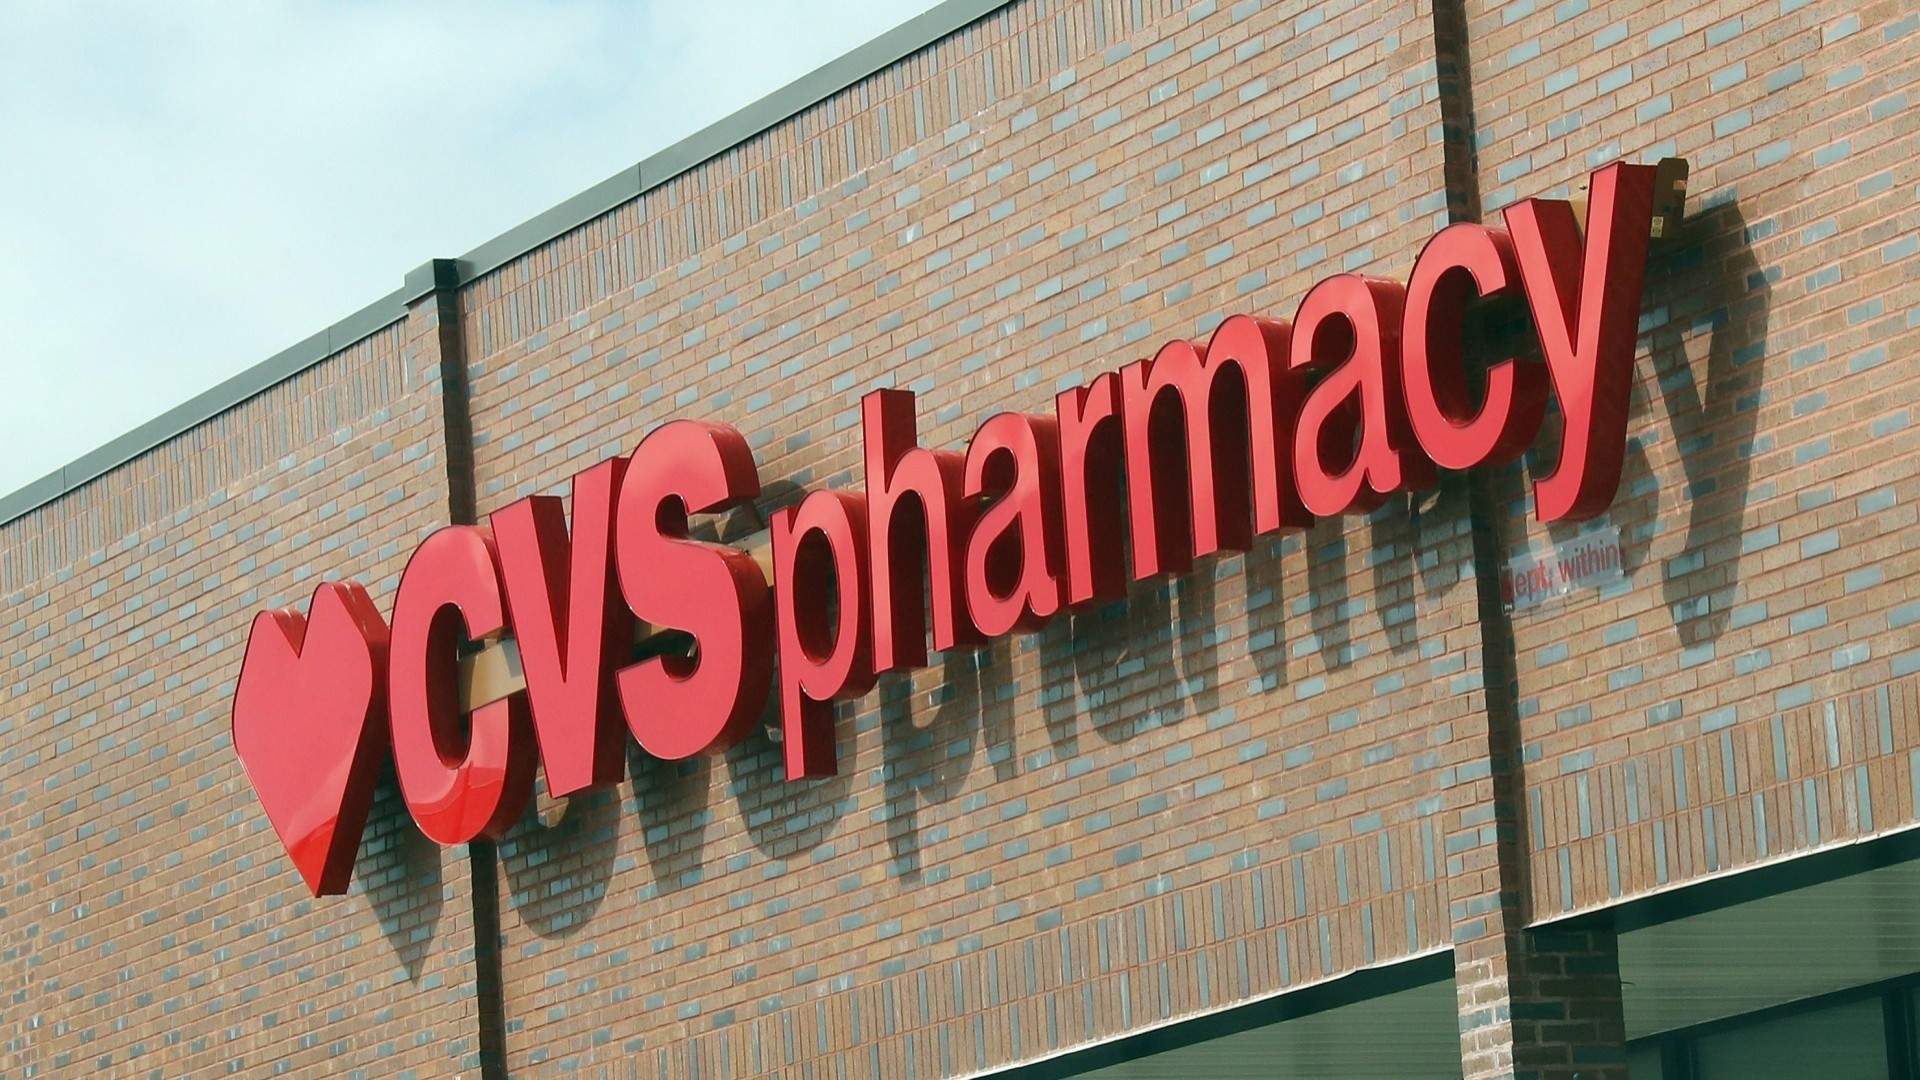 How to schedule COVID vaccine appointment at CVS in Michigan